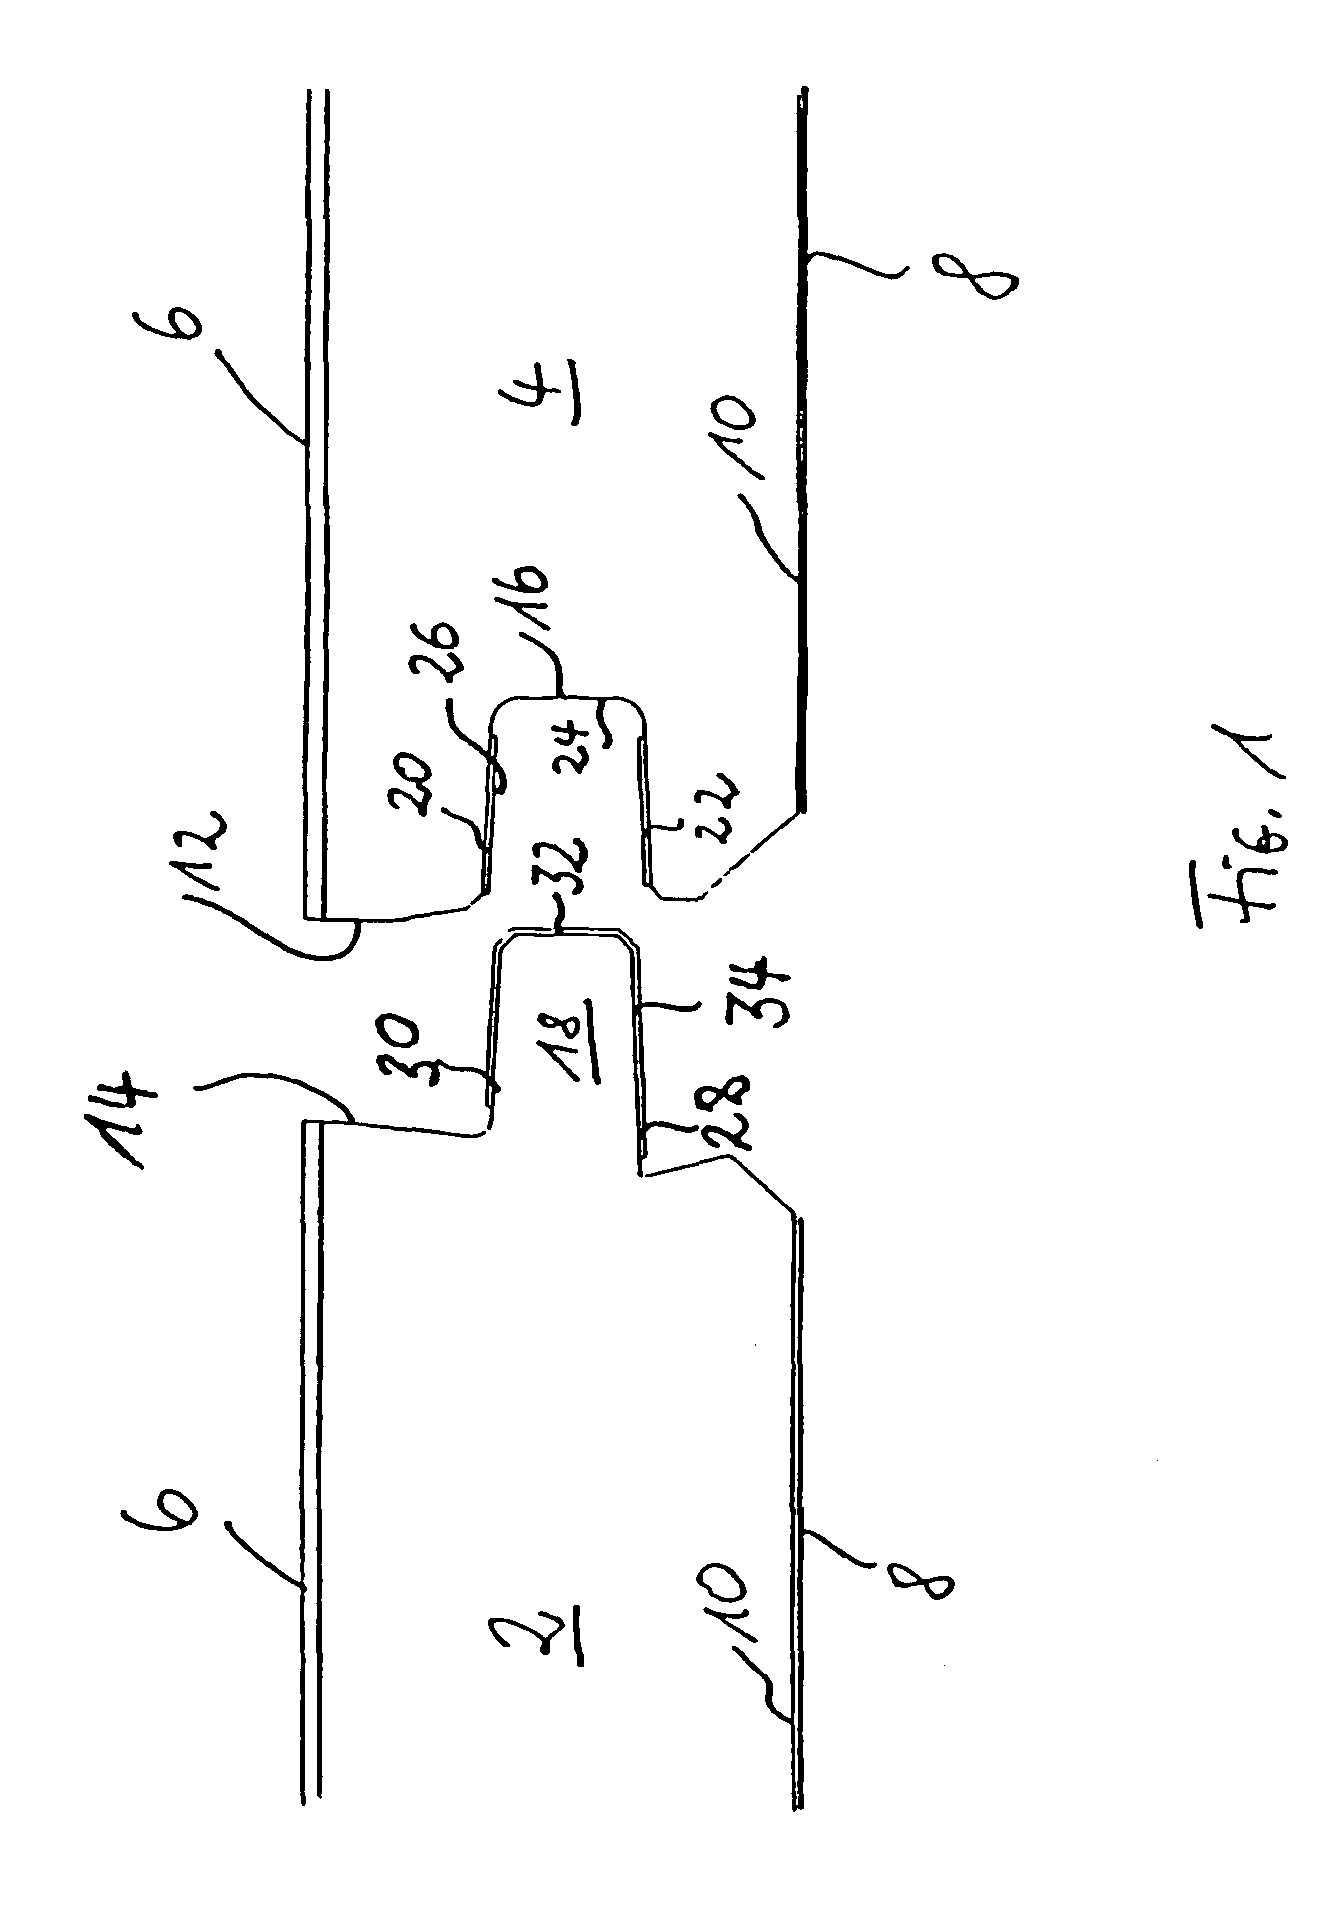 Method for coating an element with glue